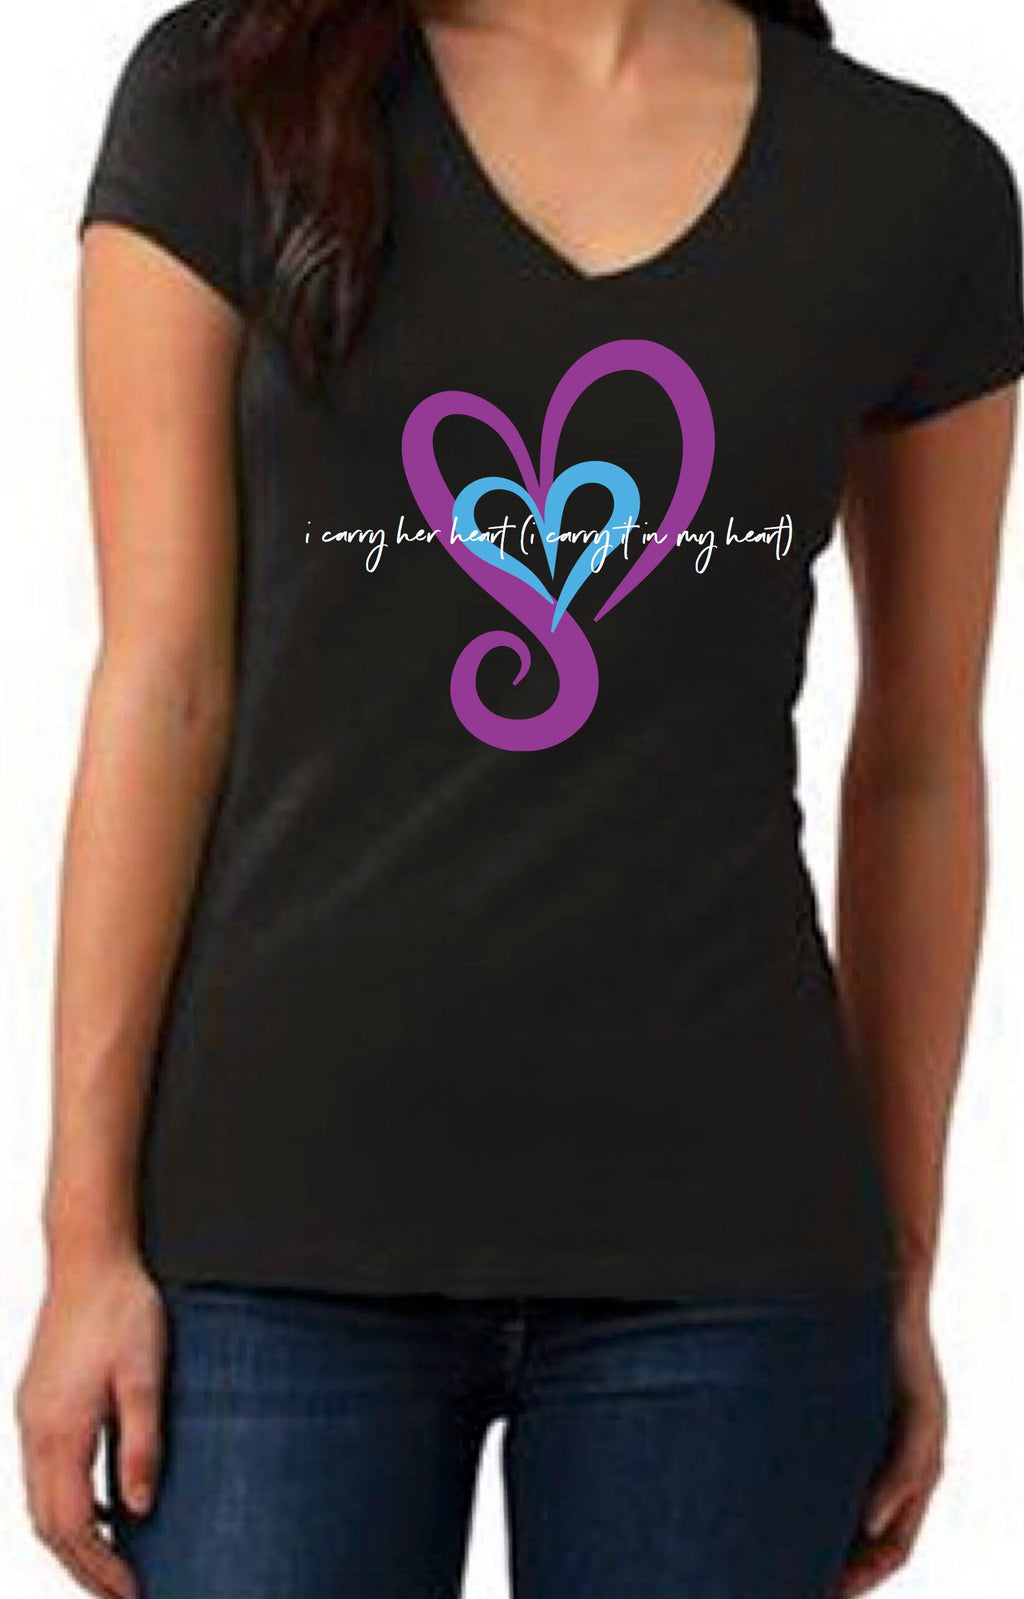 I Carry Her Heart (I carry it in my heart) V-Neck Tee